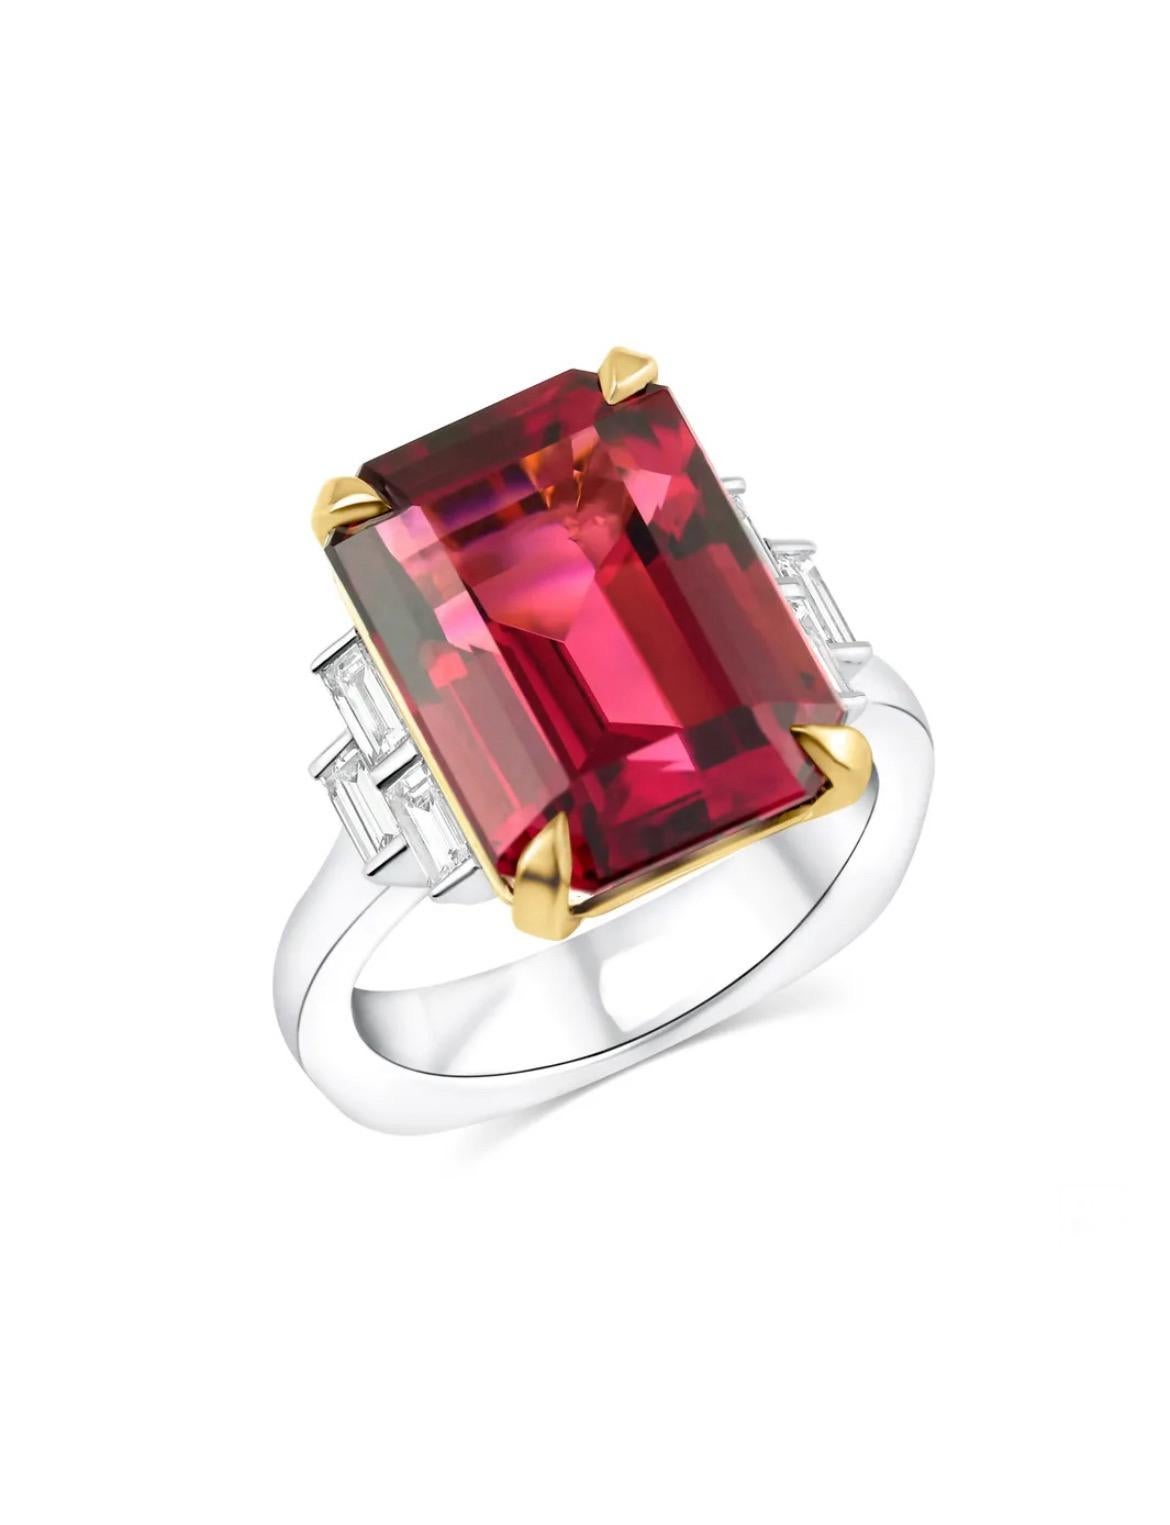 18K white with rose gold ring, featuring a breathtaking 11.20-carat Rubellite, radiating with a richly saturated raspberry-wine red glow, the impressively proportioned emerald-cut gemstone is tastefully presented with six baguette-cut diamonds